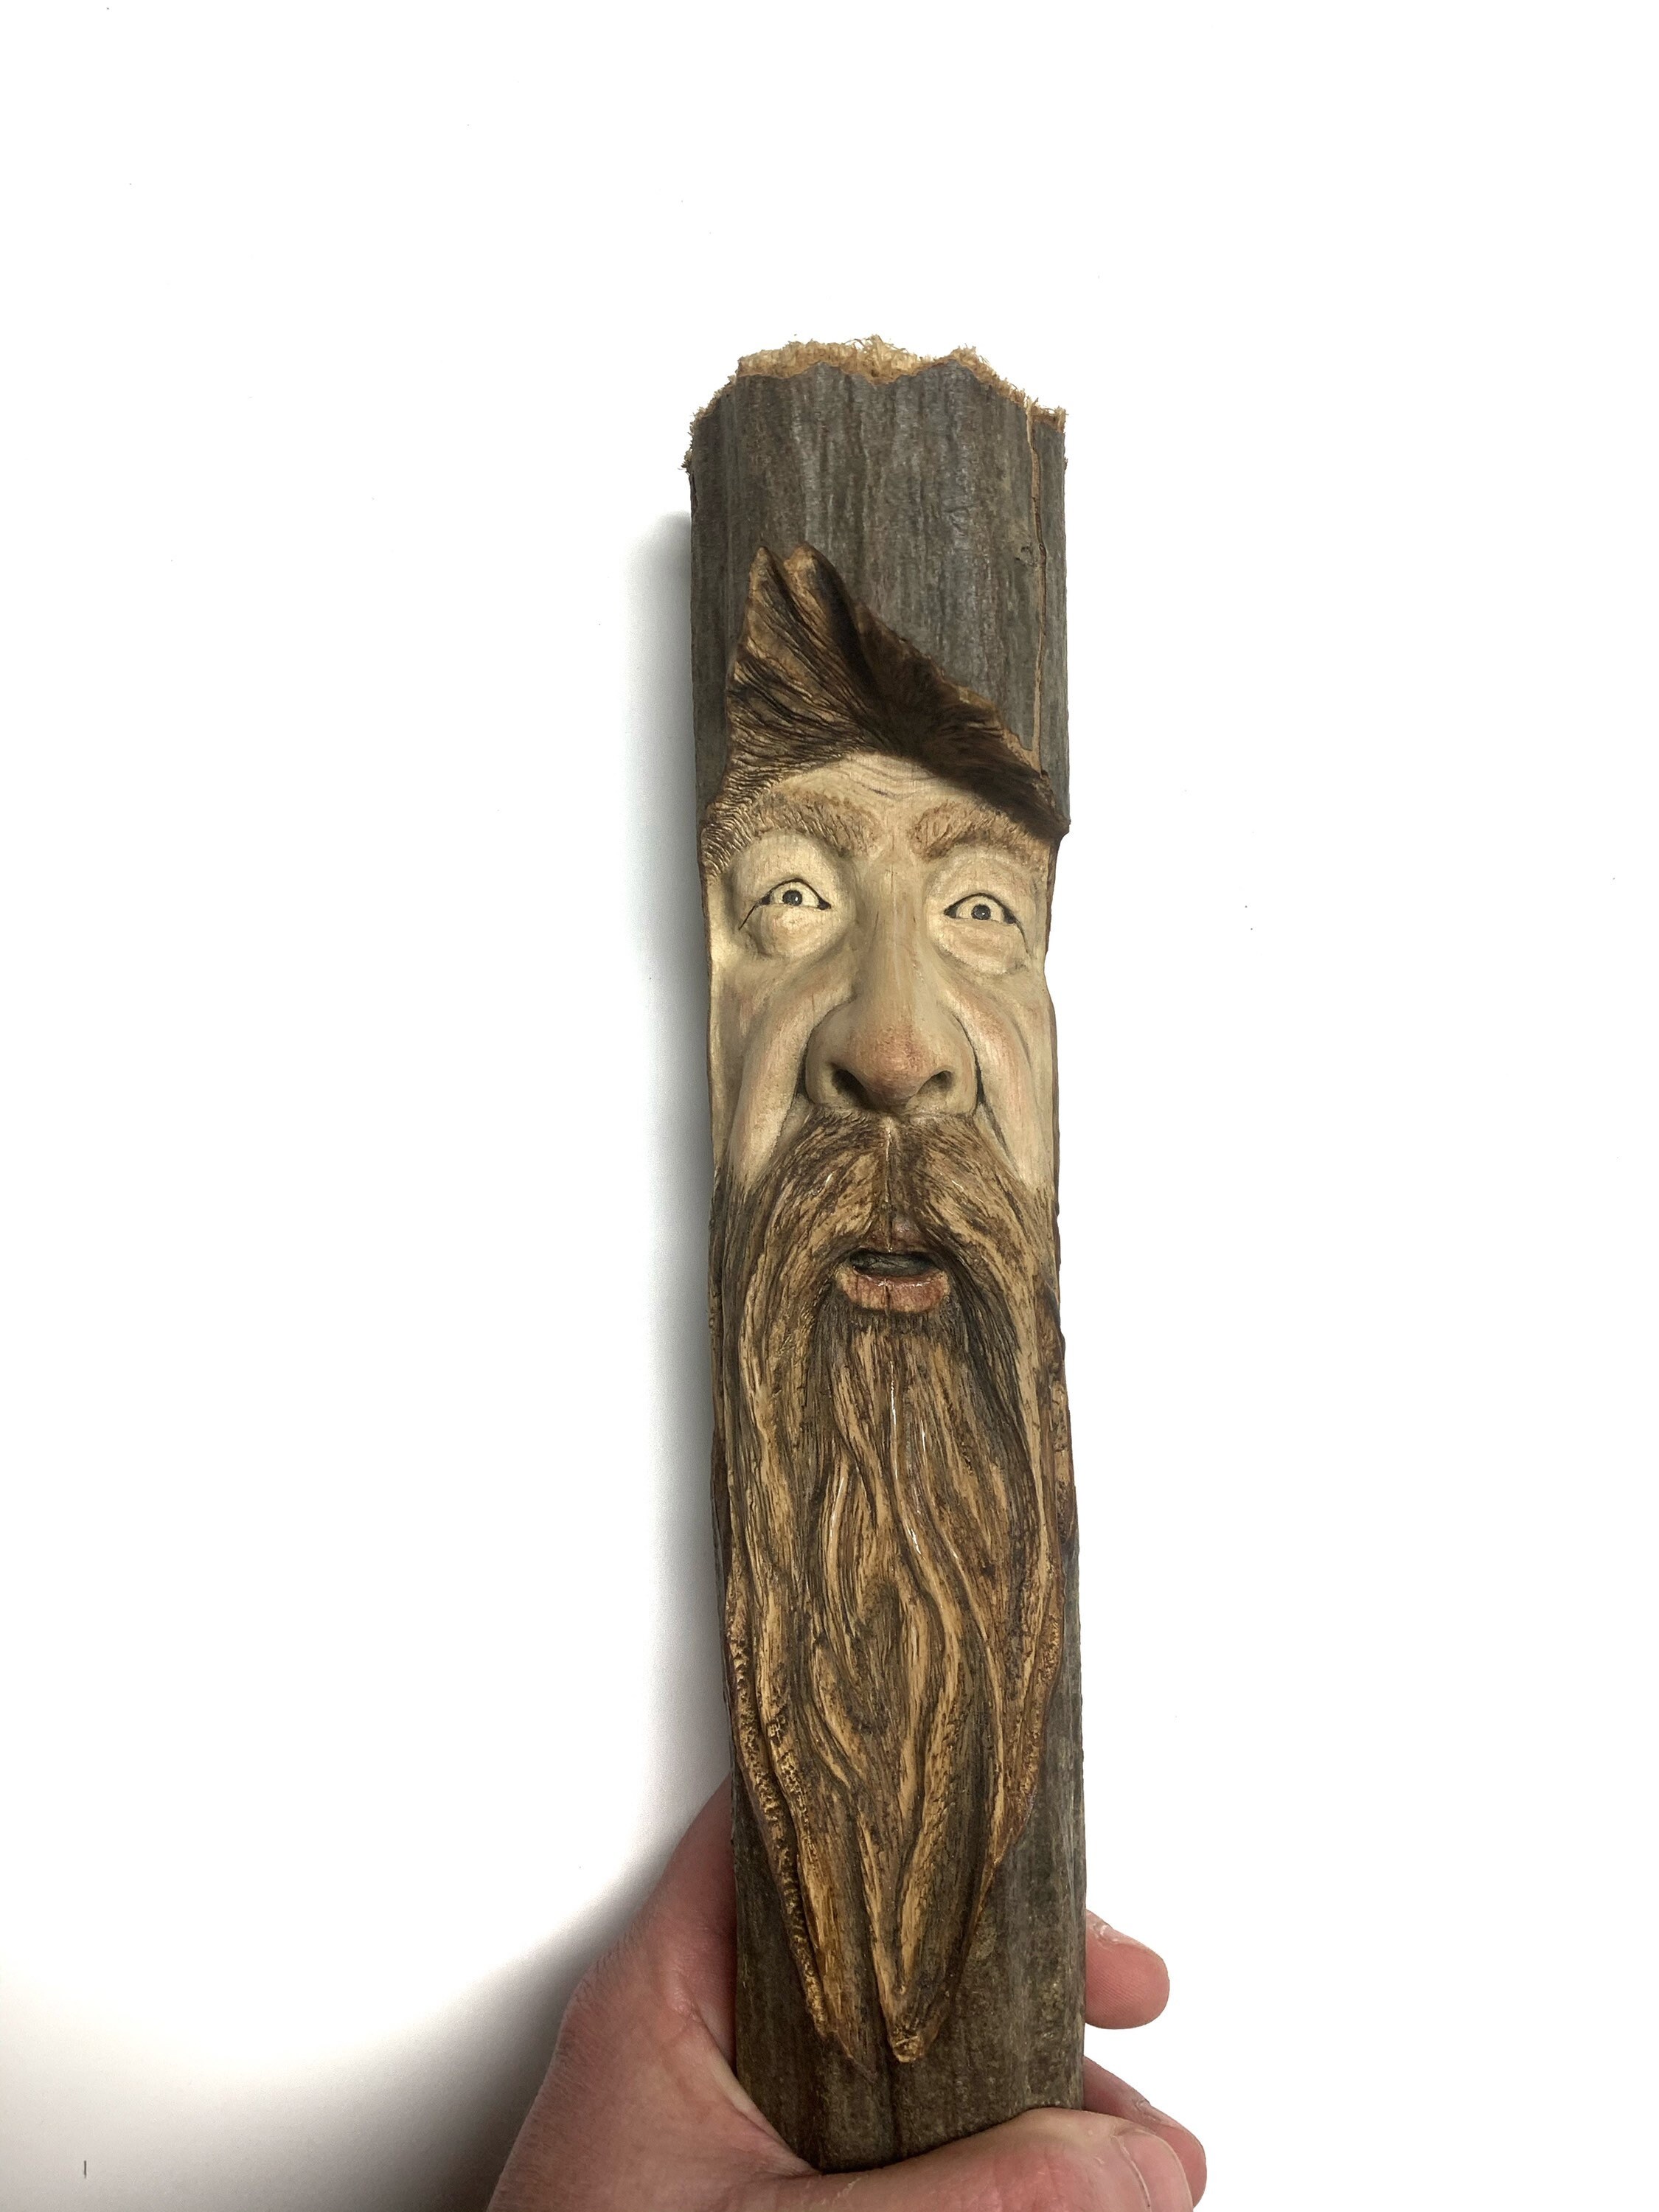 Wood Carving, Wood Spirit Carving, Wood Wall Art, Wizard Art, by Josh  Carte, Handmade Woodworking, Made in Ohio, Carving of a Face, Unique